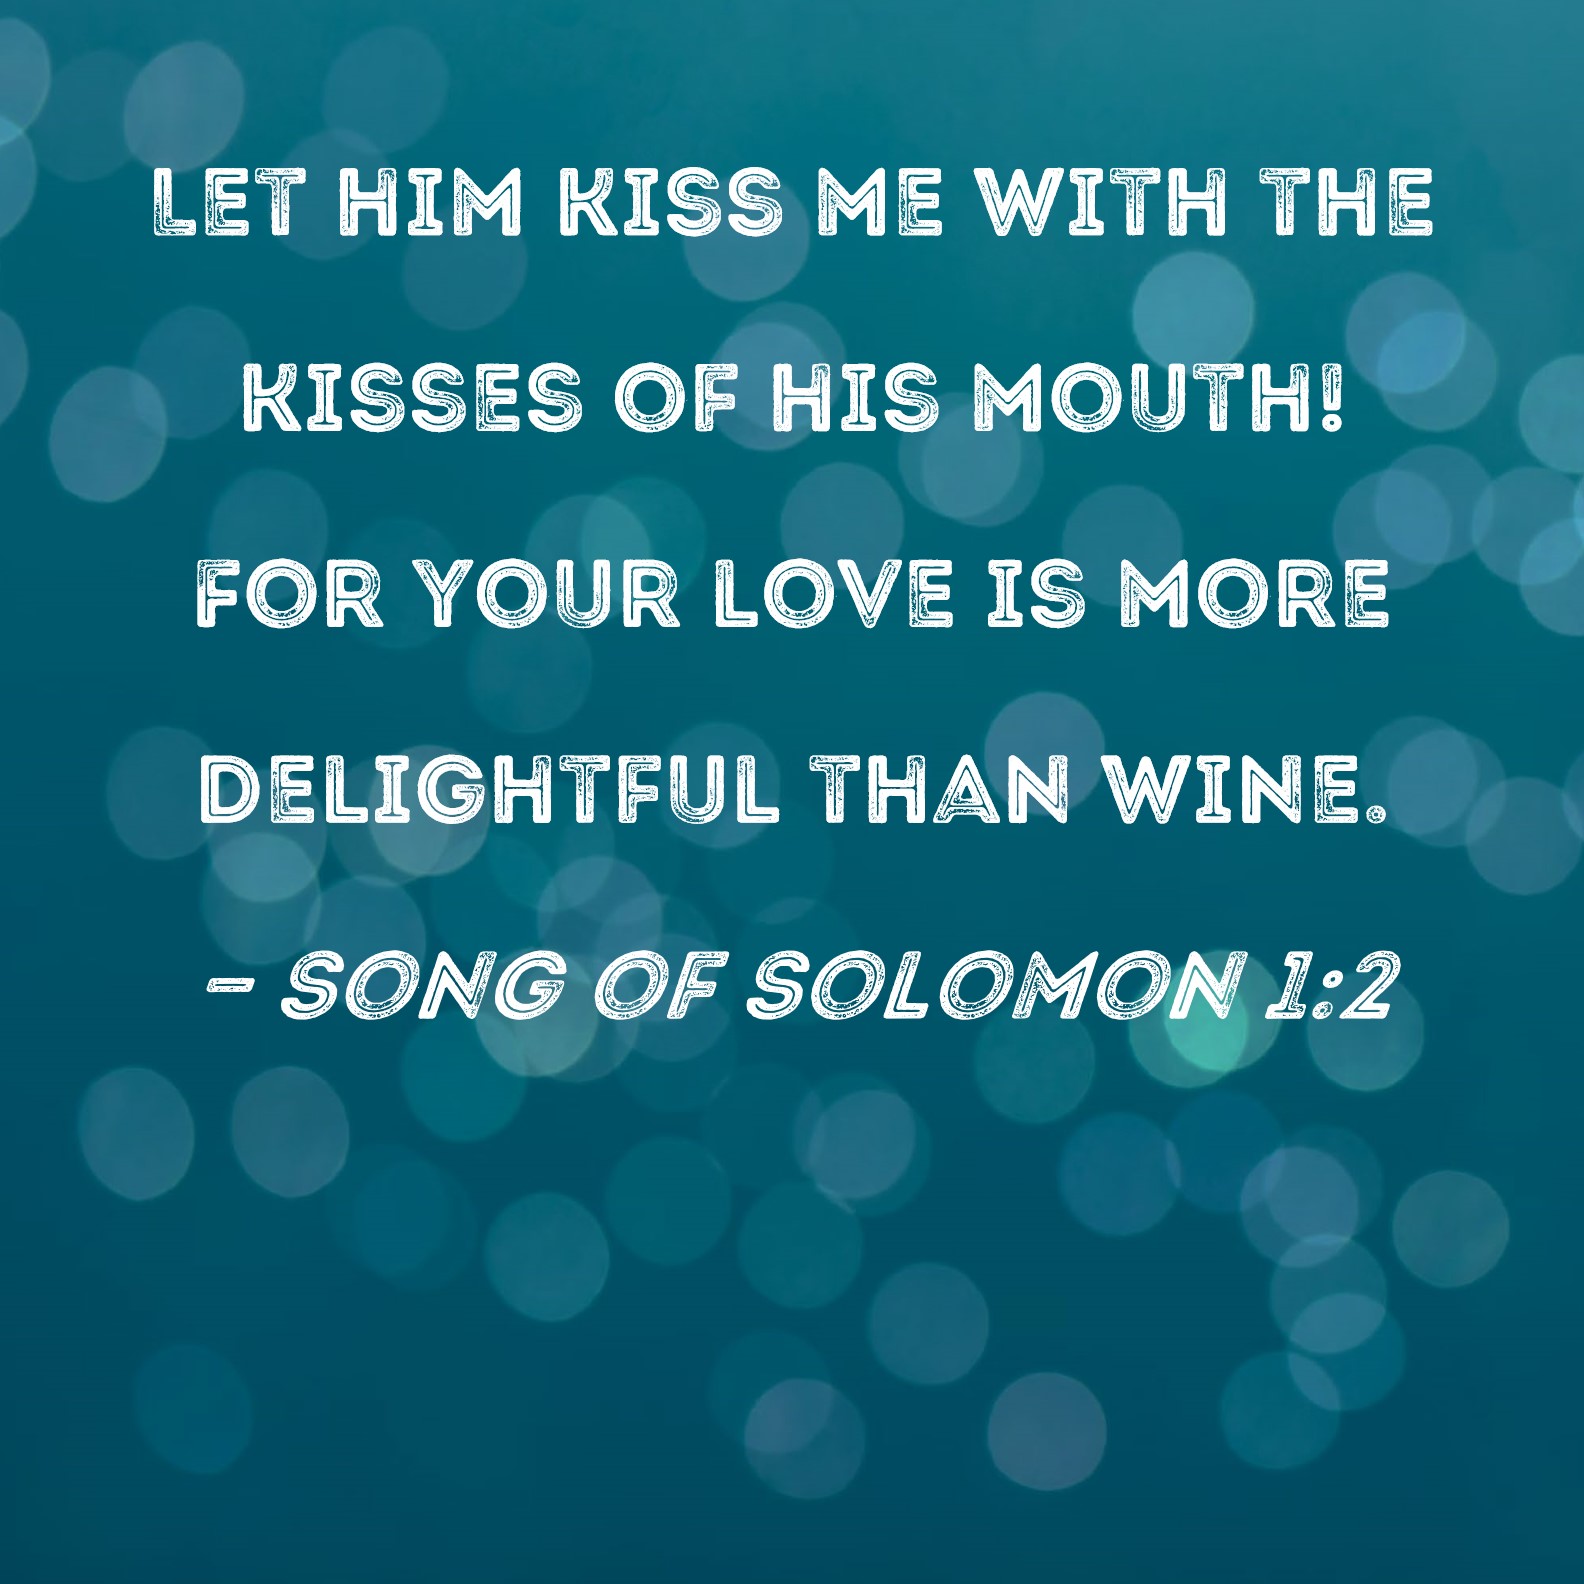 What does Song of Solomon say about kissing?